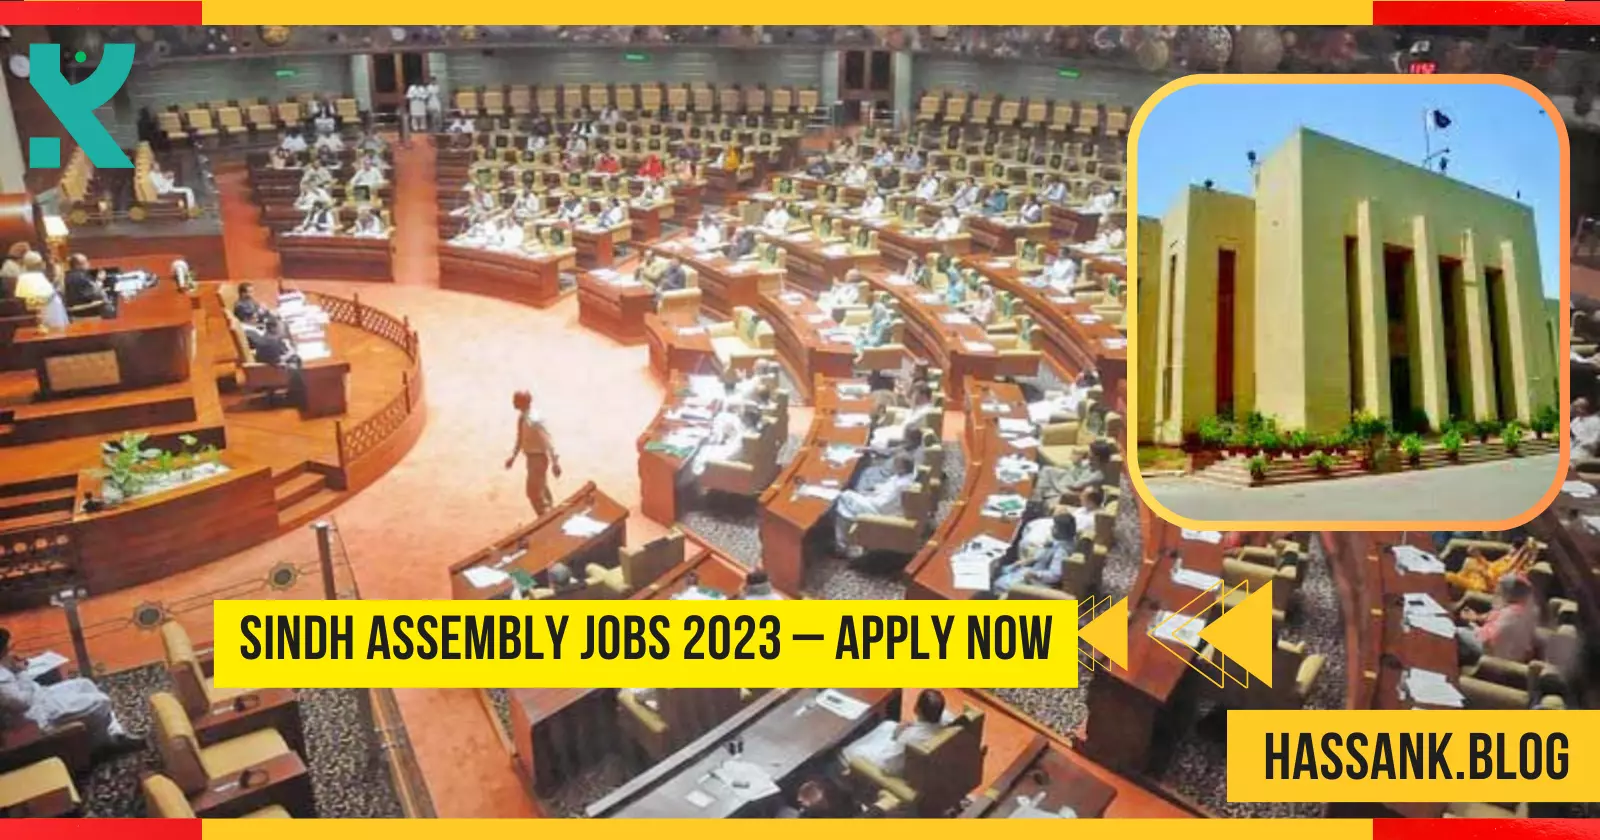 Sindh Assembly Jobs 2023 – Apply Now